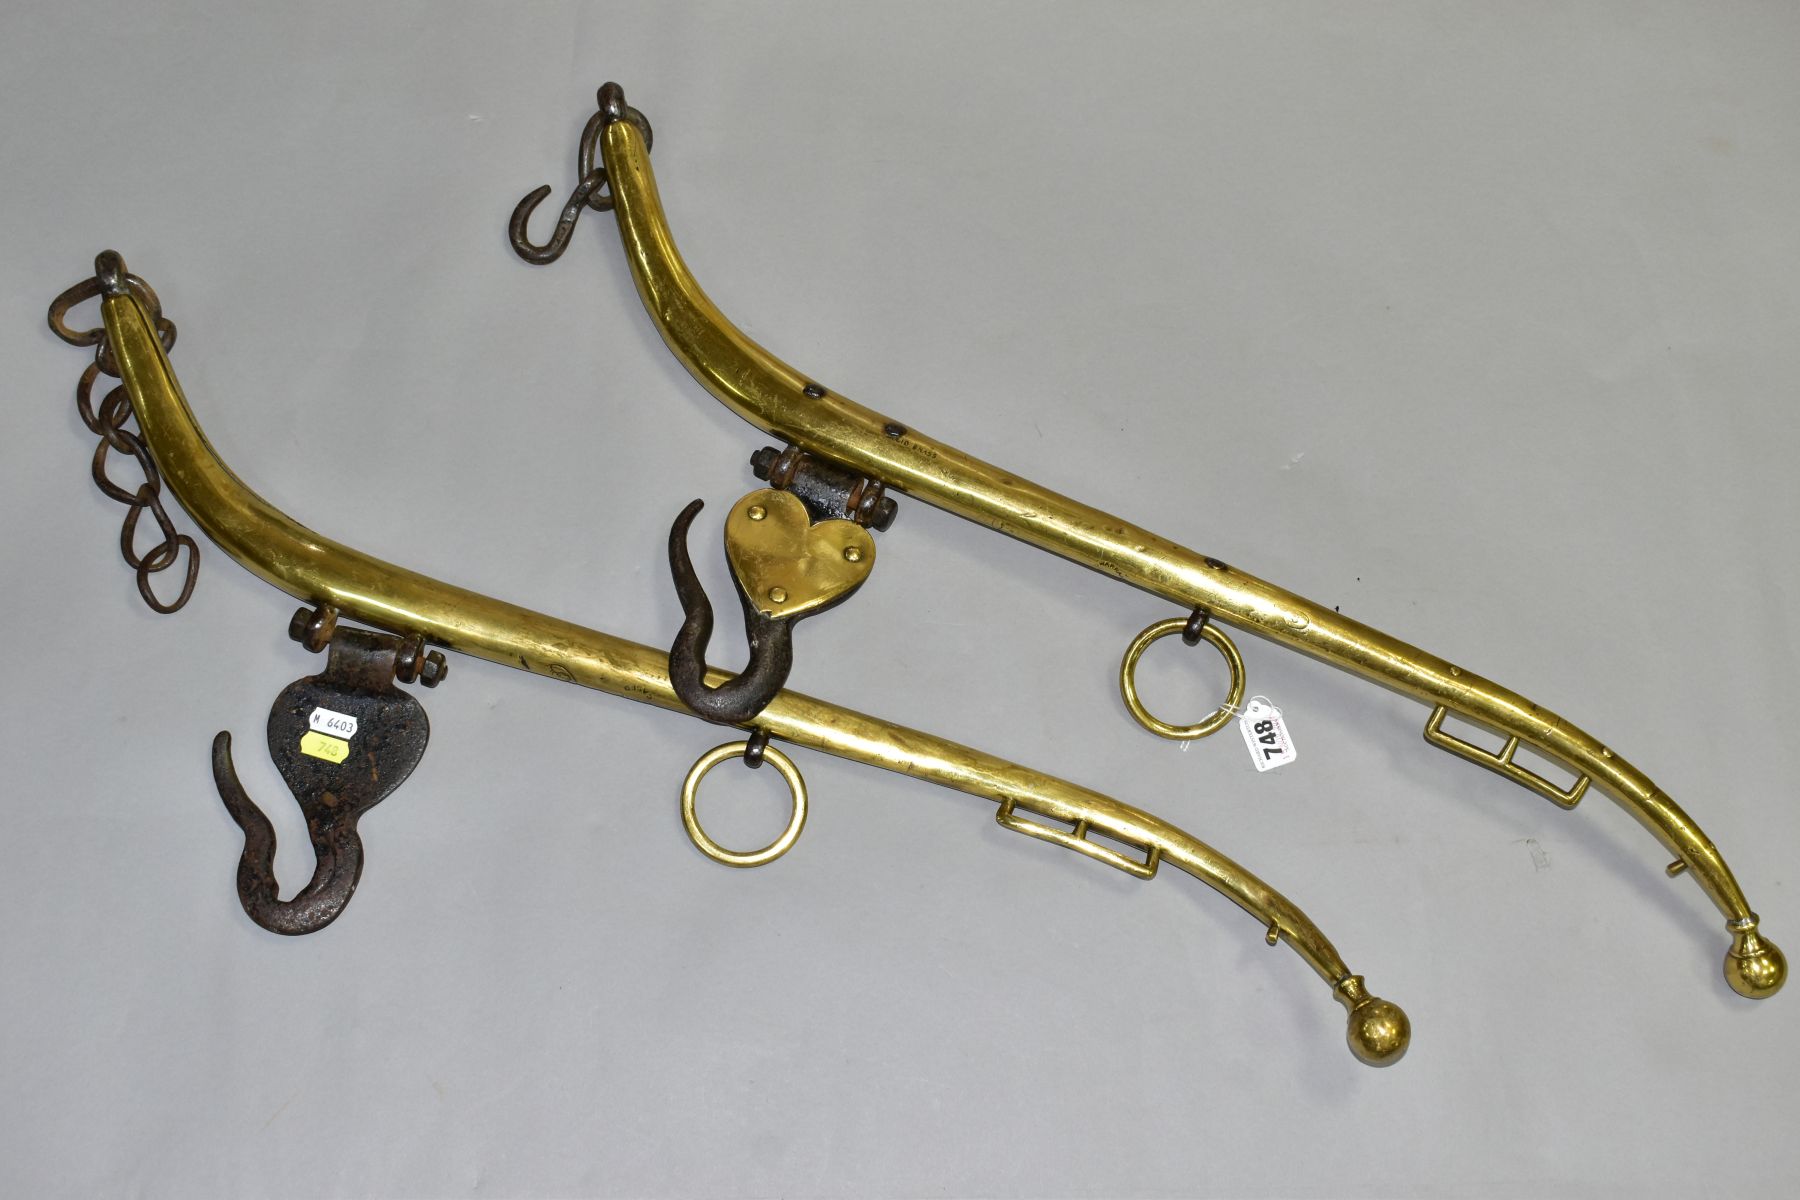 A PAIR OF HORSE HAMES, brass with wrought iron hooks, stamped marks 'No. 3 Warranted Double Cased